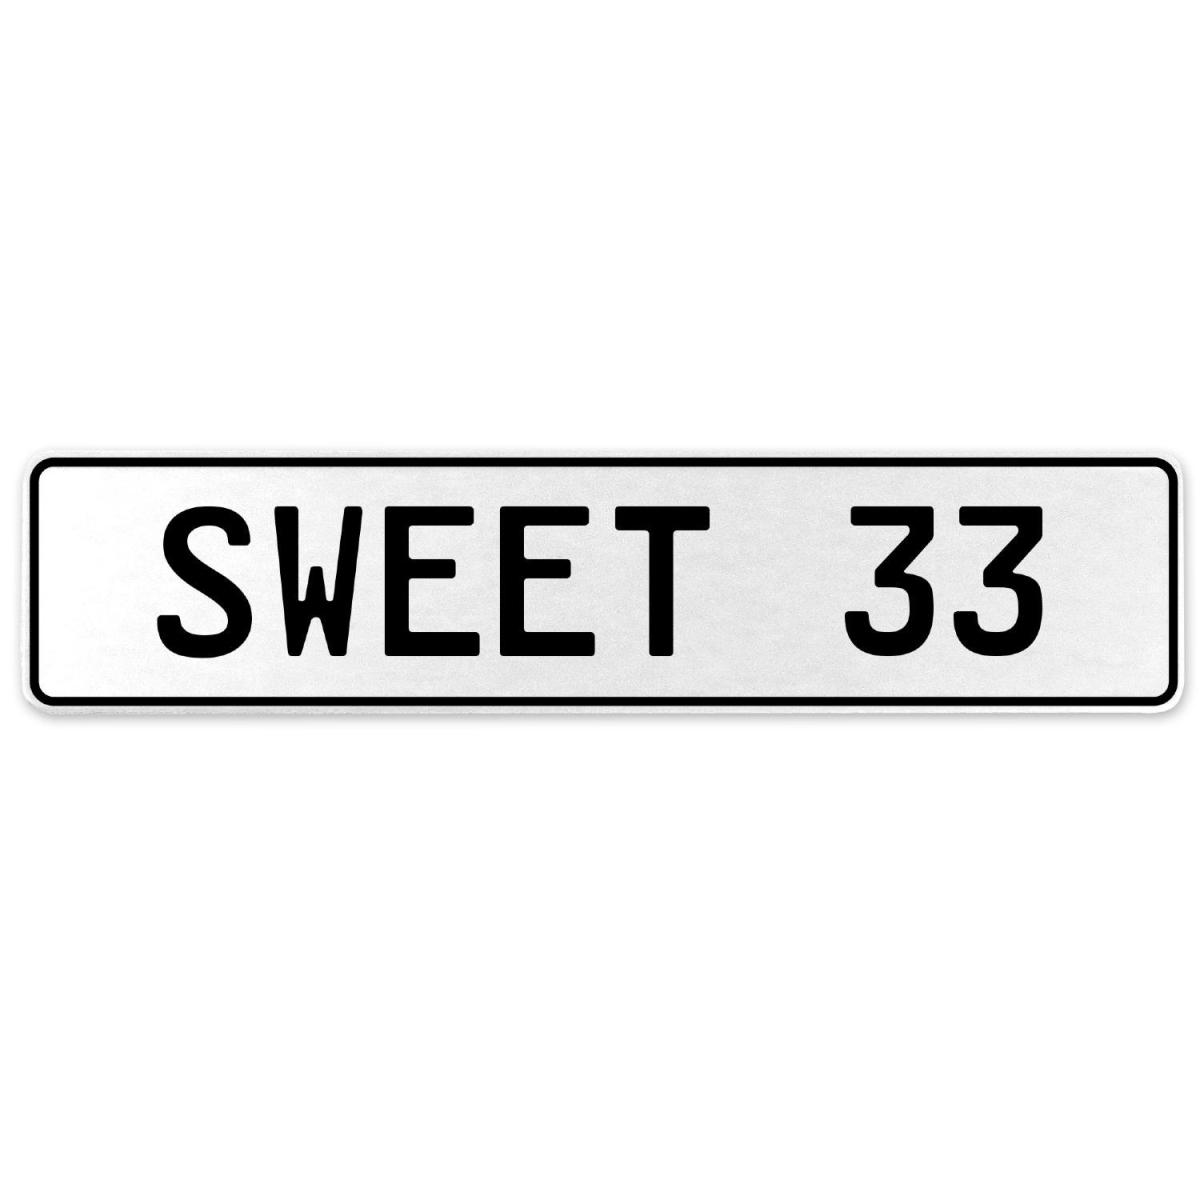 554135 Sweet 33 - White Aluminum Street Sign Mancave Euro Plate Name Door Sign Wall